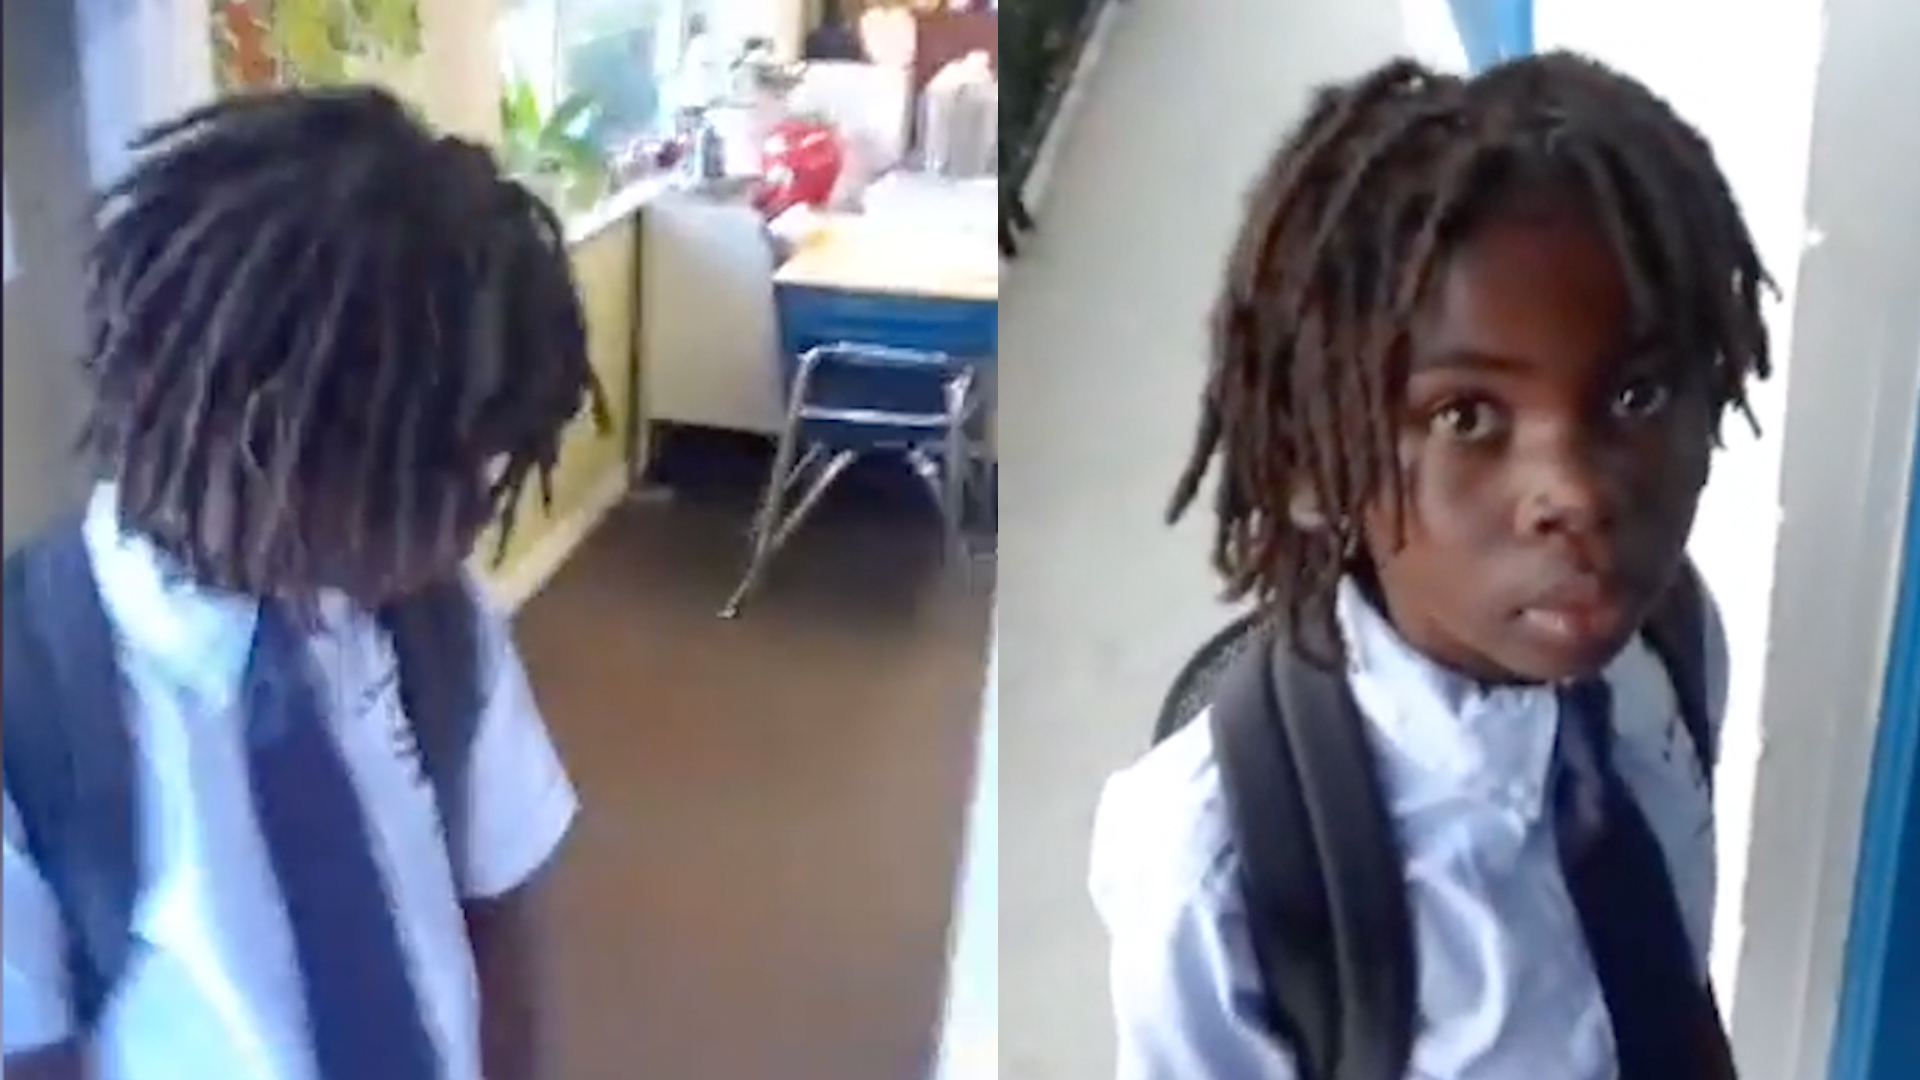 Furor after black 6-year-old with dreadlocks turned away from Florida  Christian school - The Washington Post